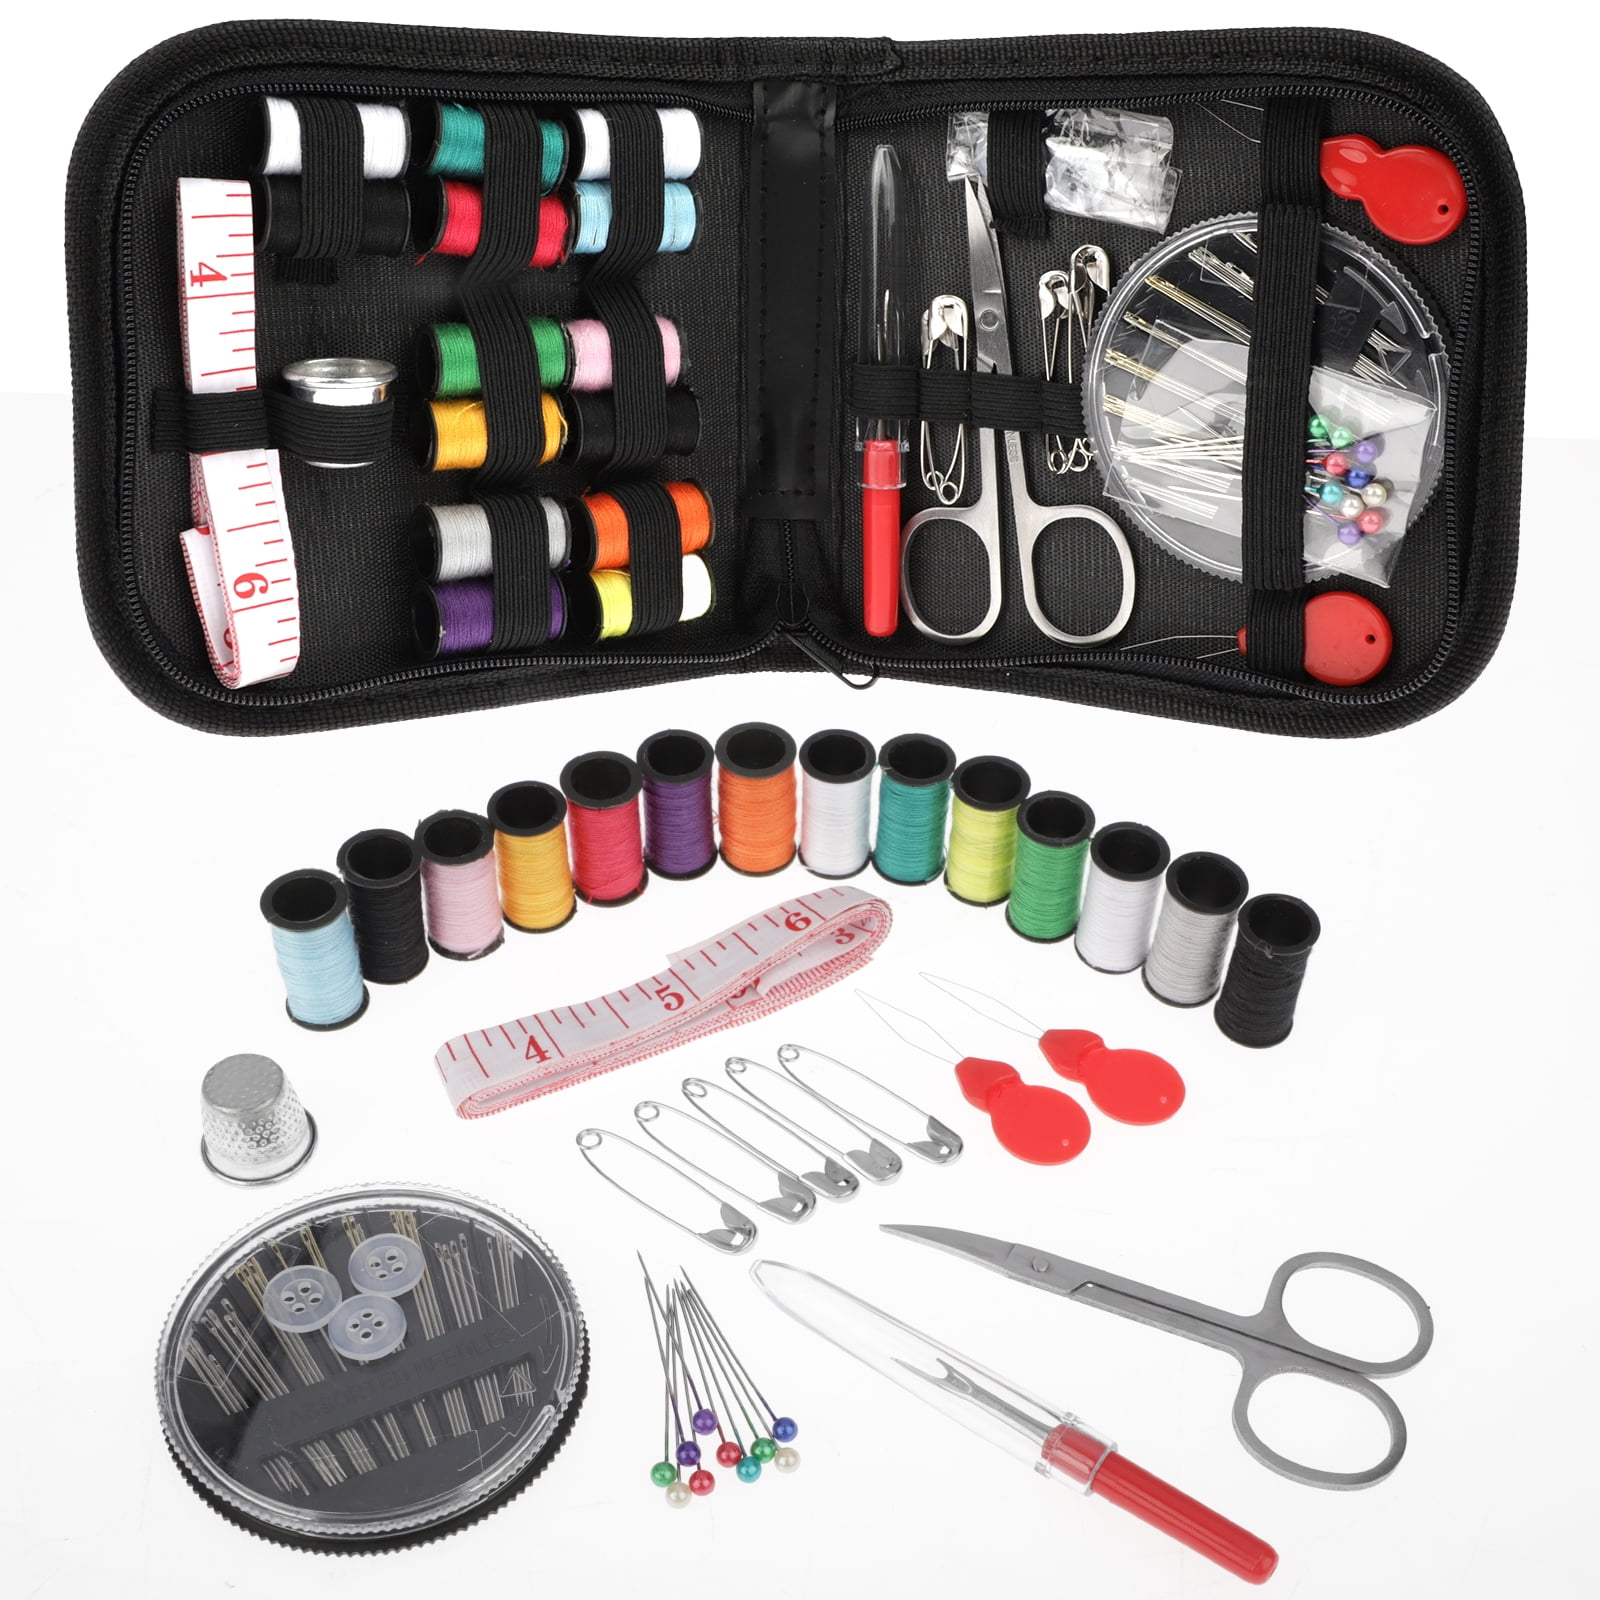 HERCHR Small Sewing Kit for Adults, Needle and Thread Kit for Sewing,  Sewing Kit for Beginners with Scissors Thimble Practical Sewing Repair Kit  for